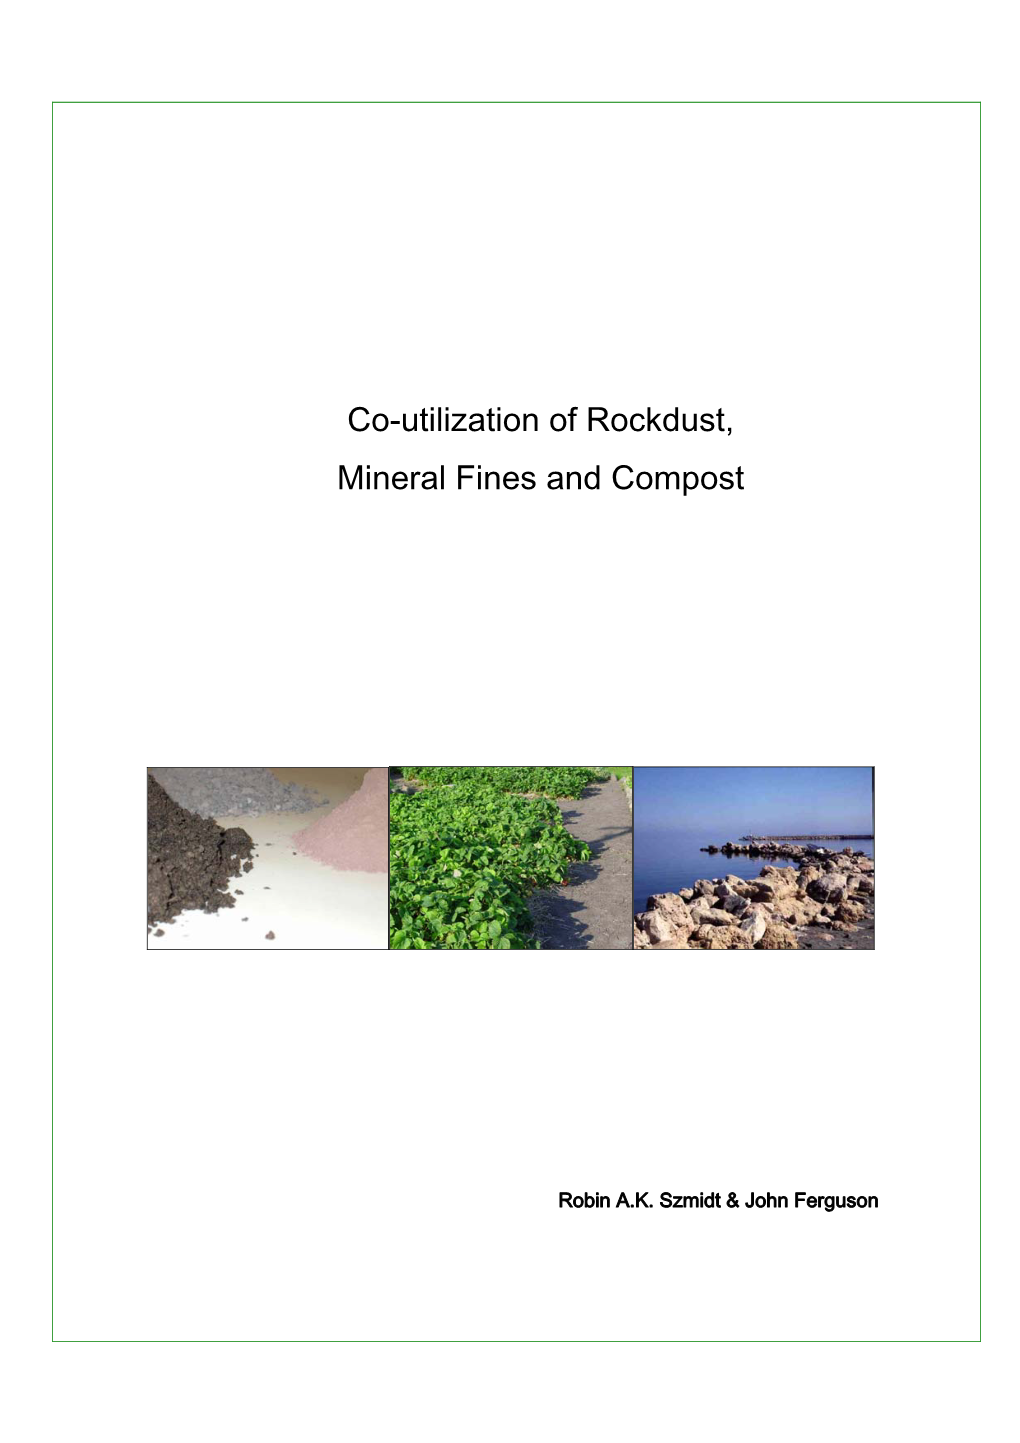 Co-Utilization of Rockdust, Mineral Fines and Compost